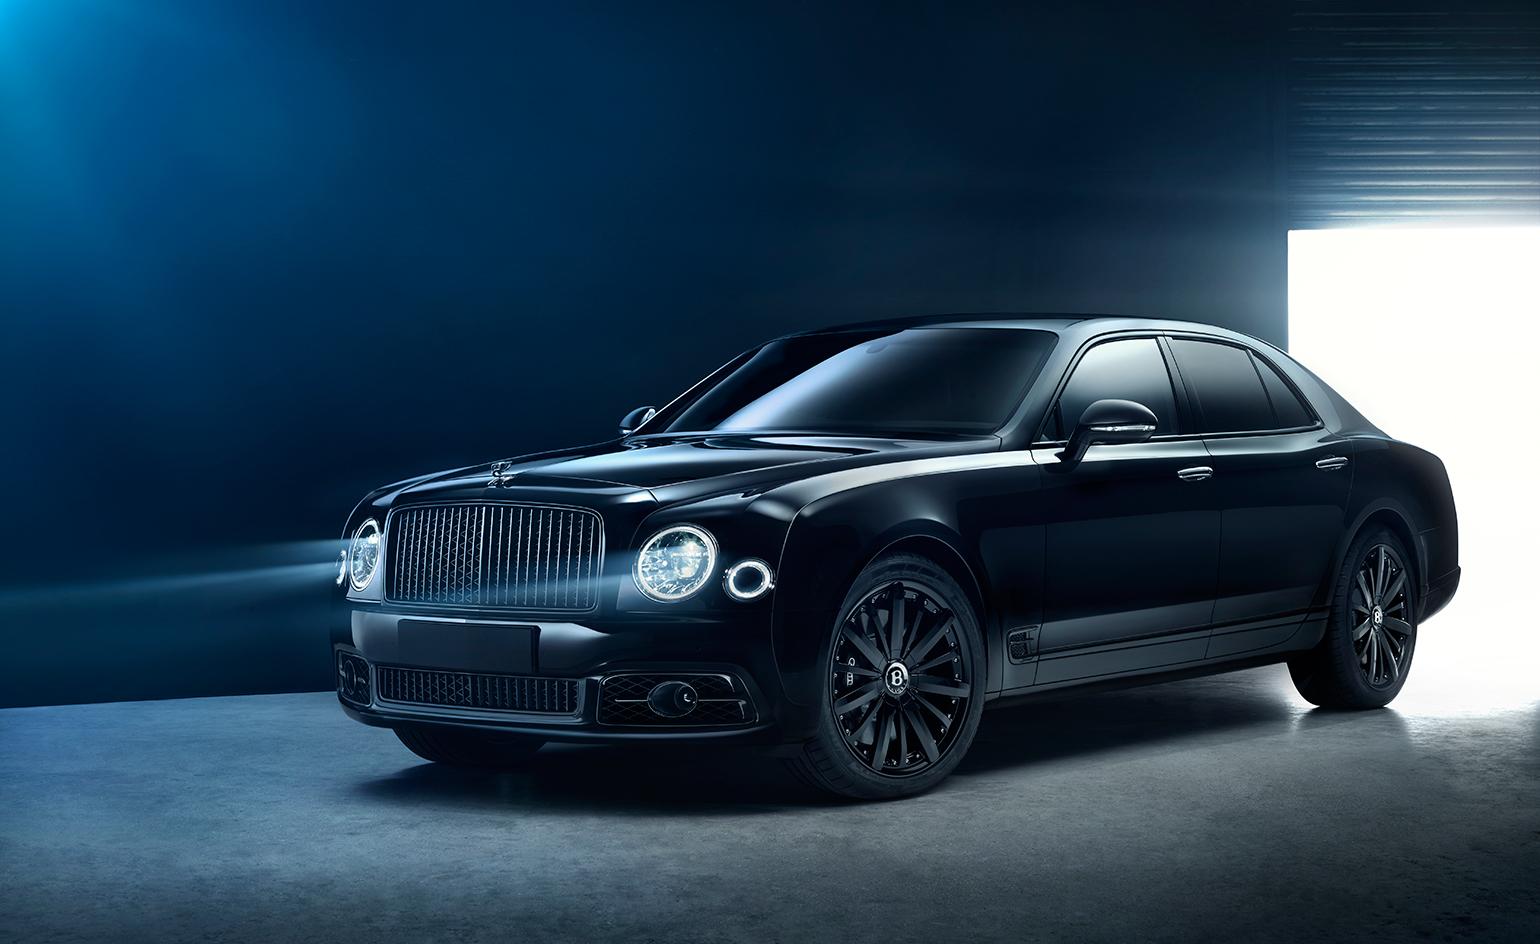 Bentley and Bamford Watch give birth to a stylish new car. Wallpaper*